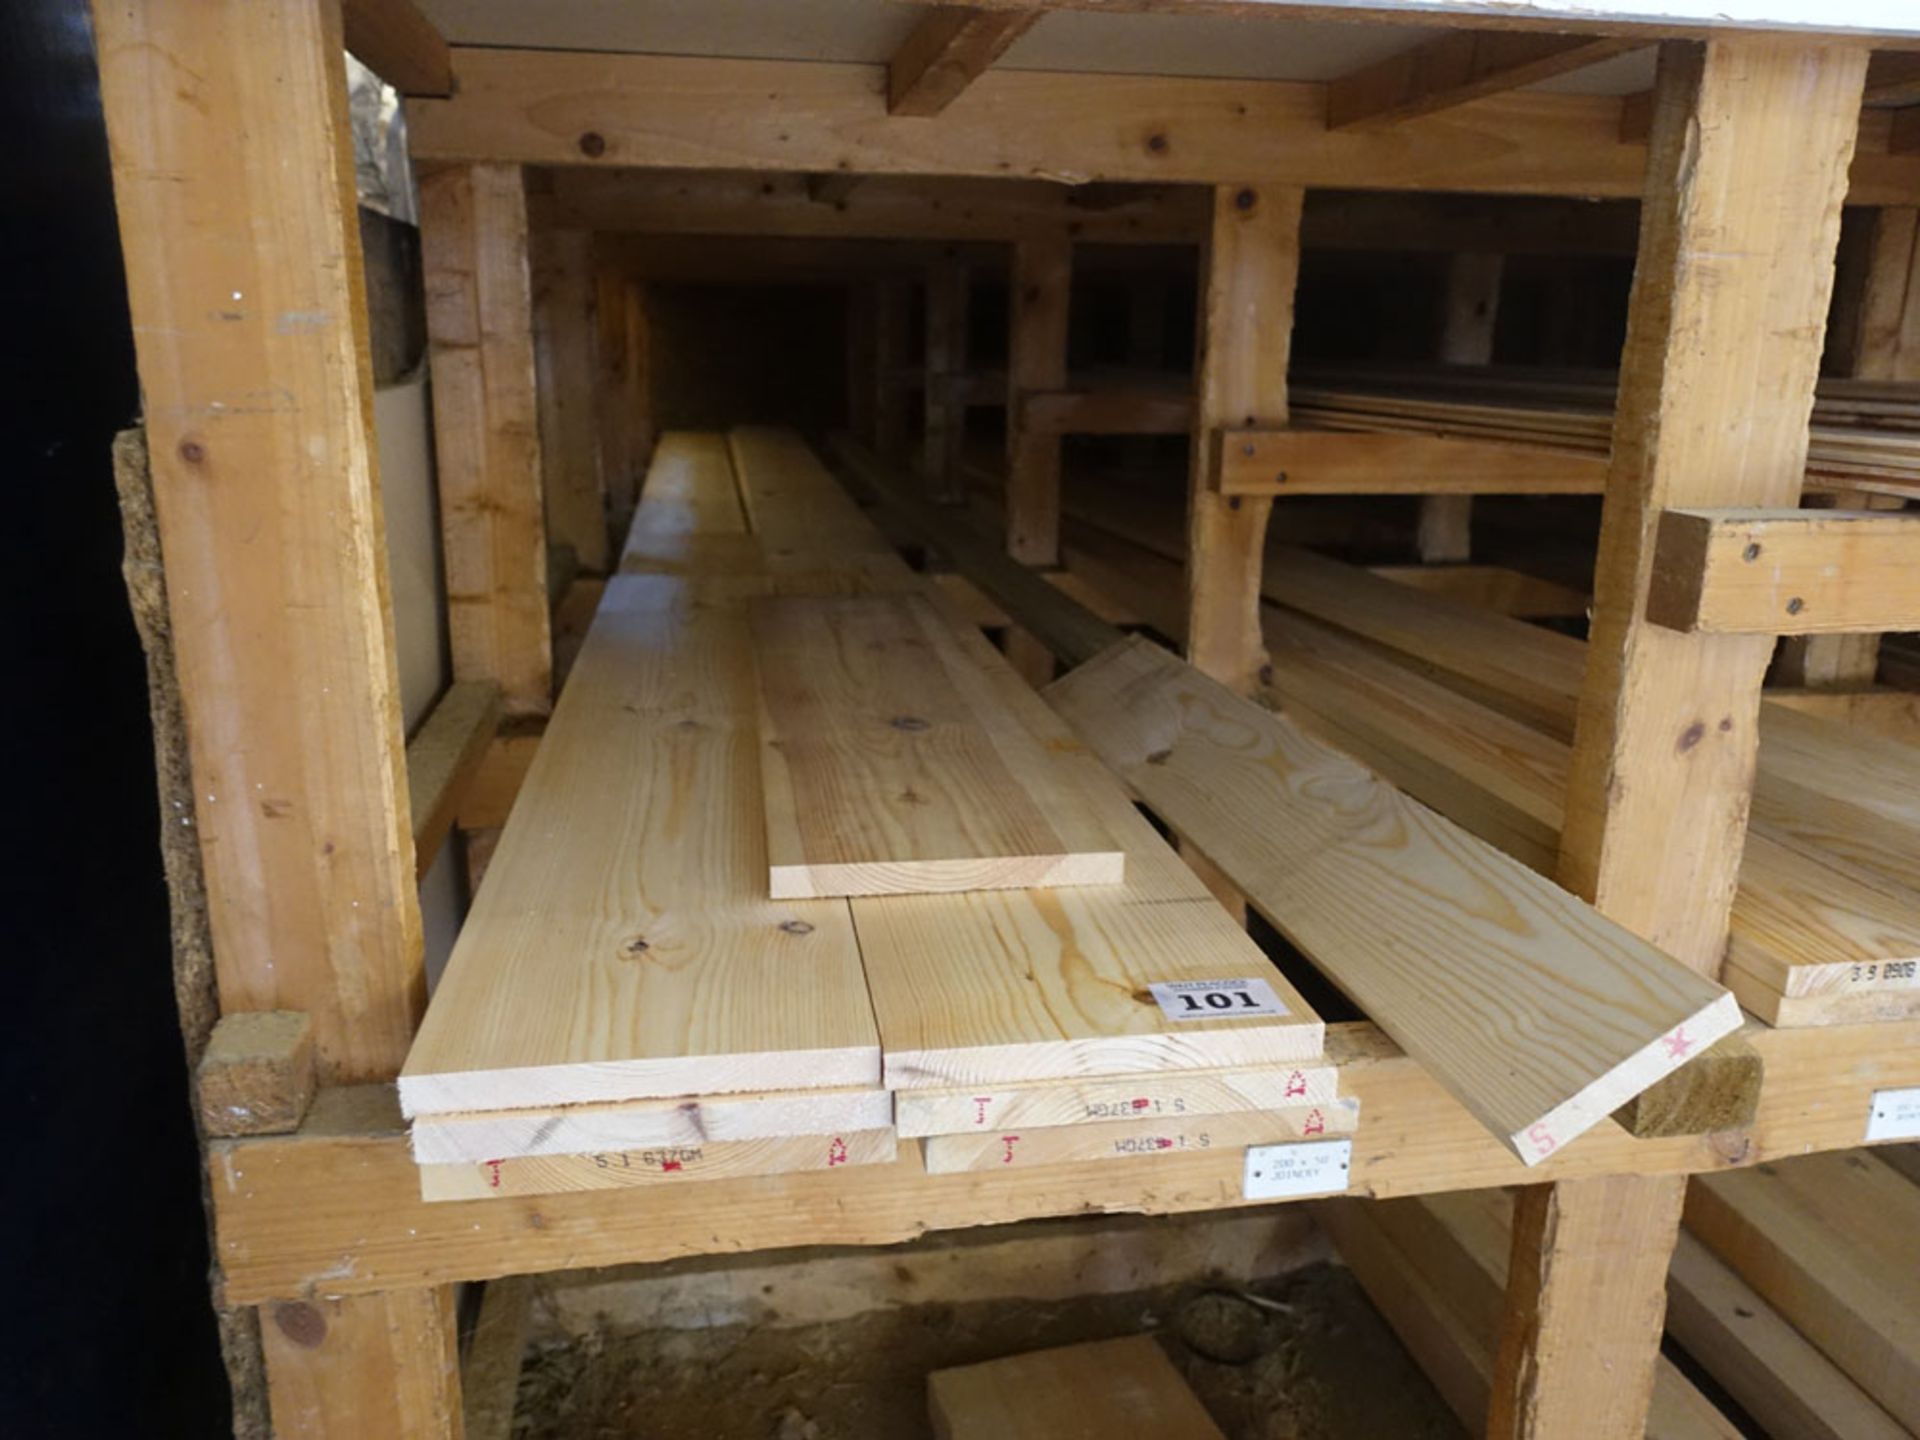 Remaining stocks of mainly softwood timbers including 220 x 20 x 5m, 146 x 20 x 4m PAR boarding,